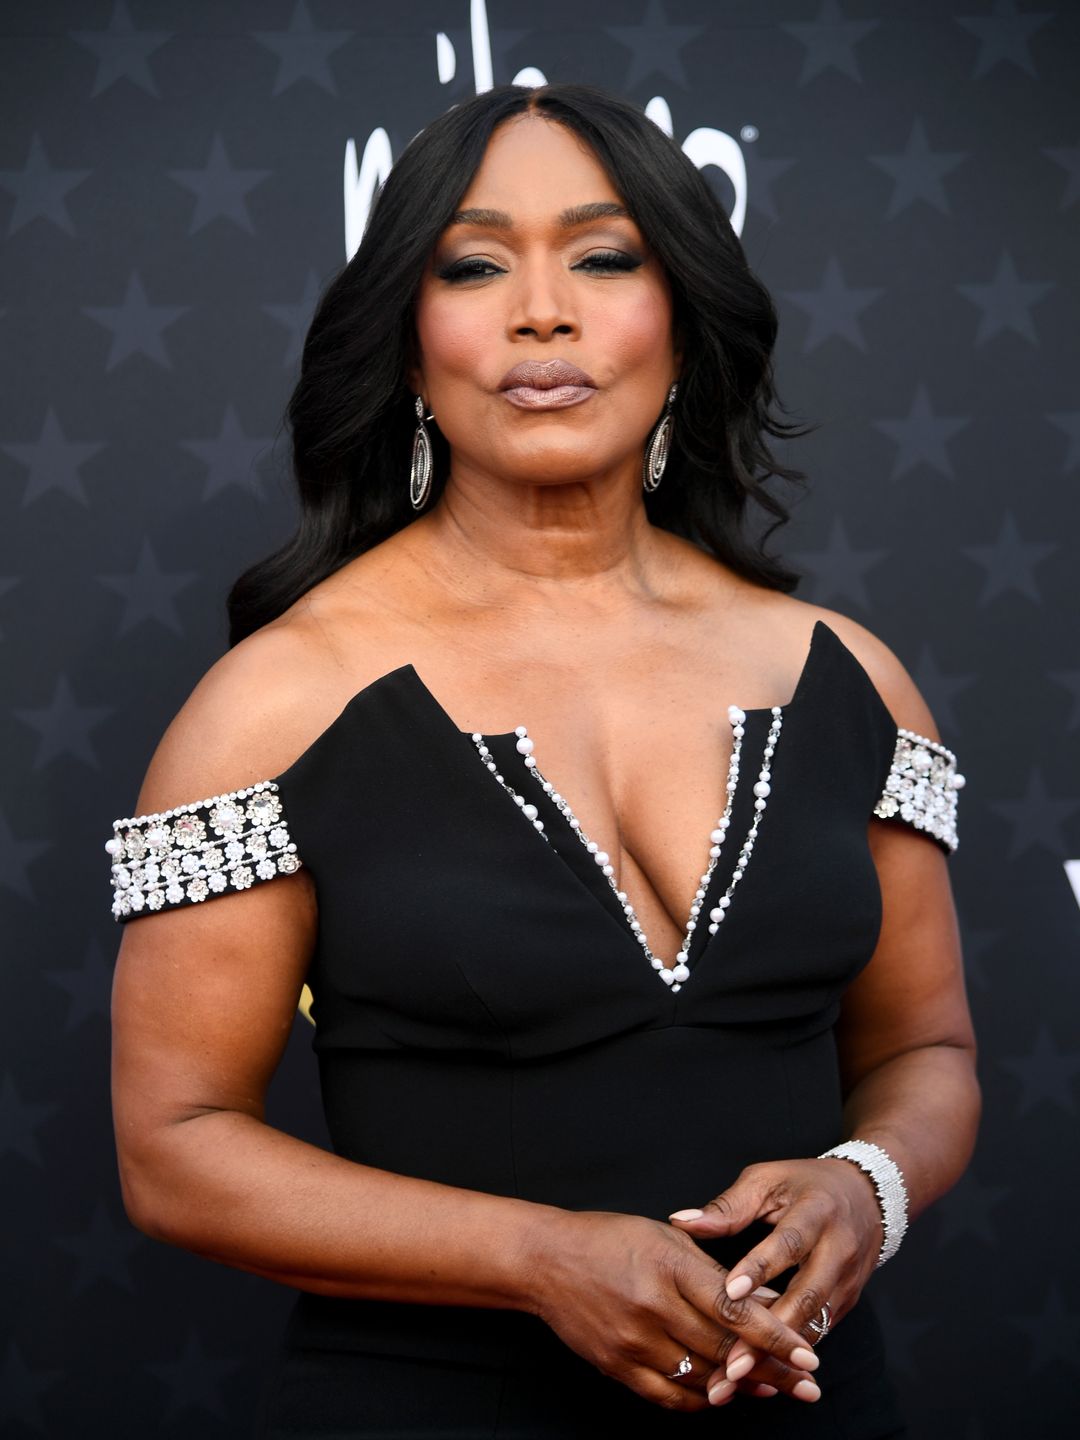 Angela Bassett wearing a black plunging gown on the red carpet 